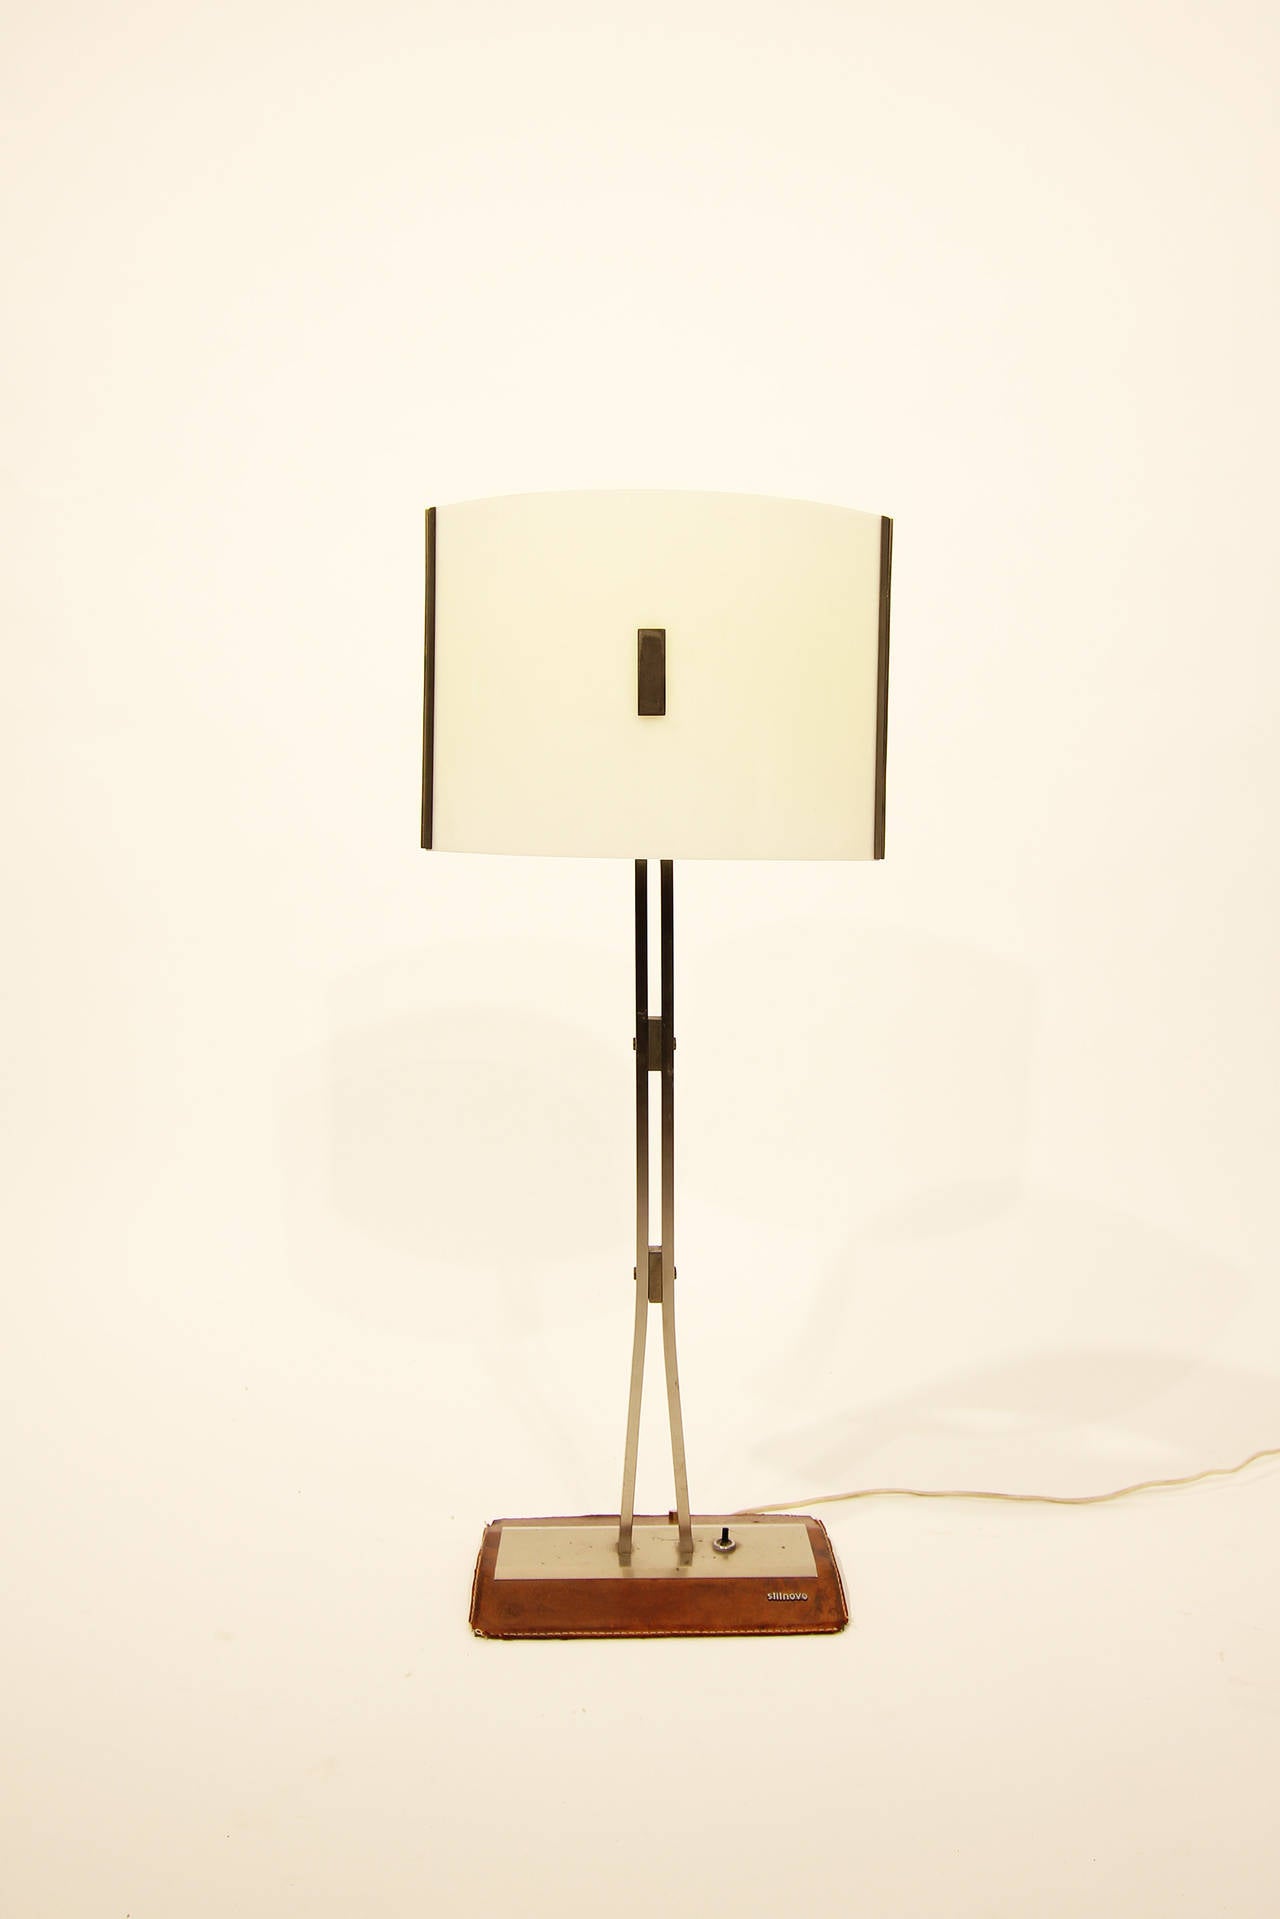 Table Lamp by Stilnovo Italy circa 1958

construction metal, foot covered with leather
acrylic glass white and yellow